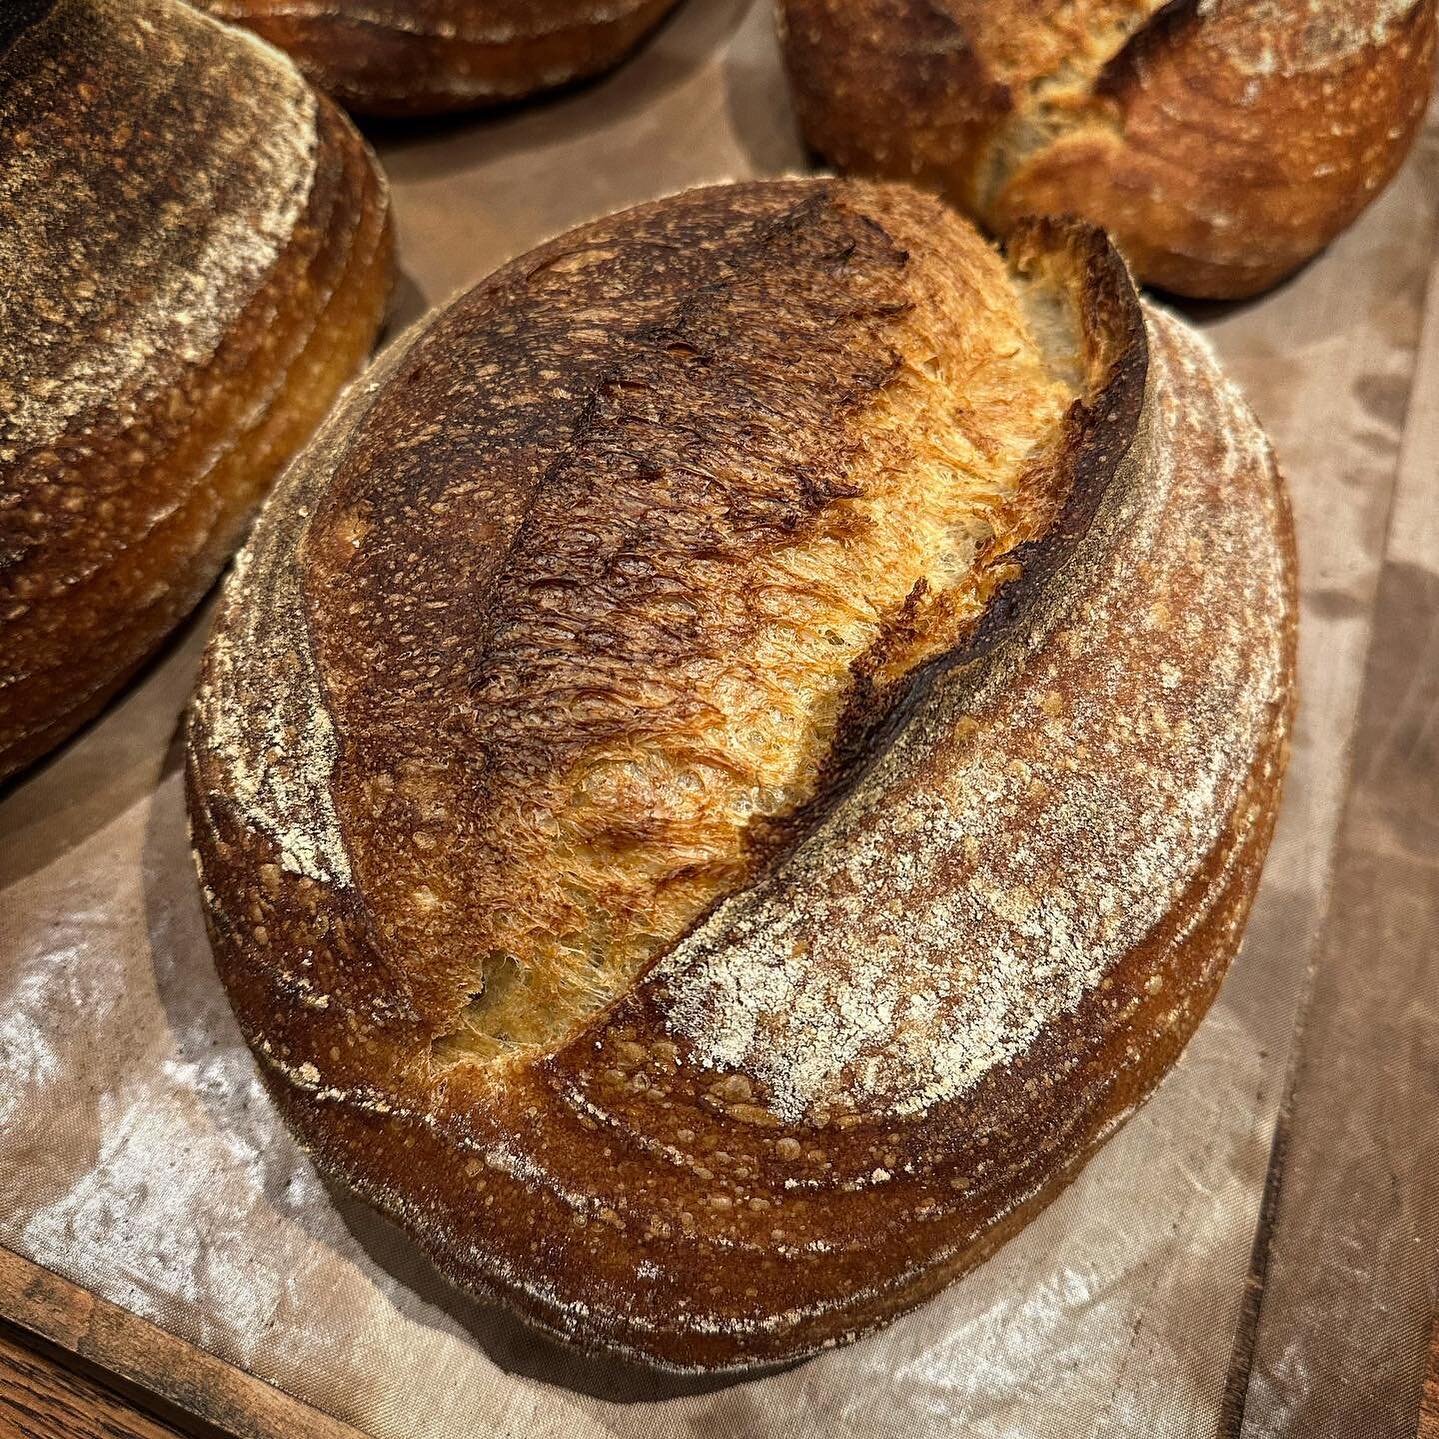 BACK TO THE BREAD! The starter is reviving, the flour is ready and yeast is ready to motor. No better way to start Jan and the new year than with some properly leavened bread delivered right to your door. 1st drop is this Friday. Orders are open. See